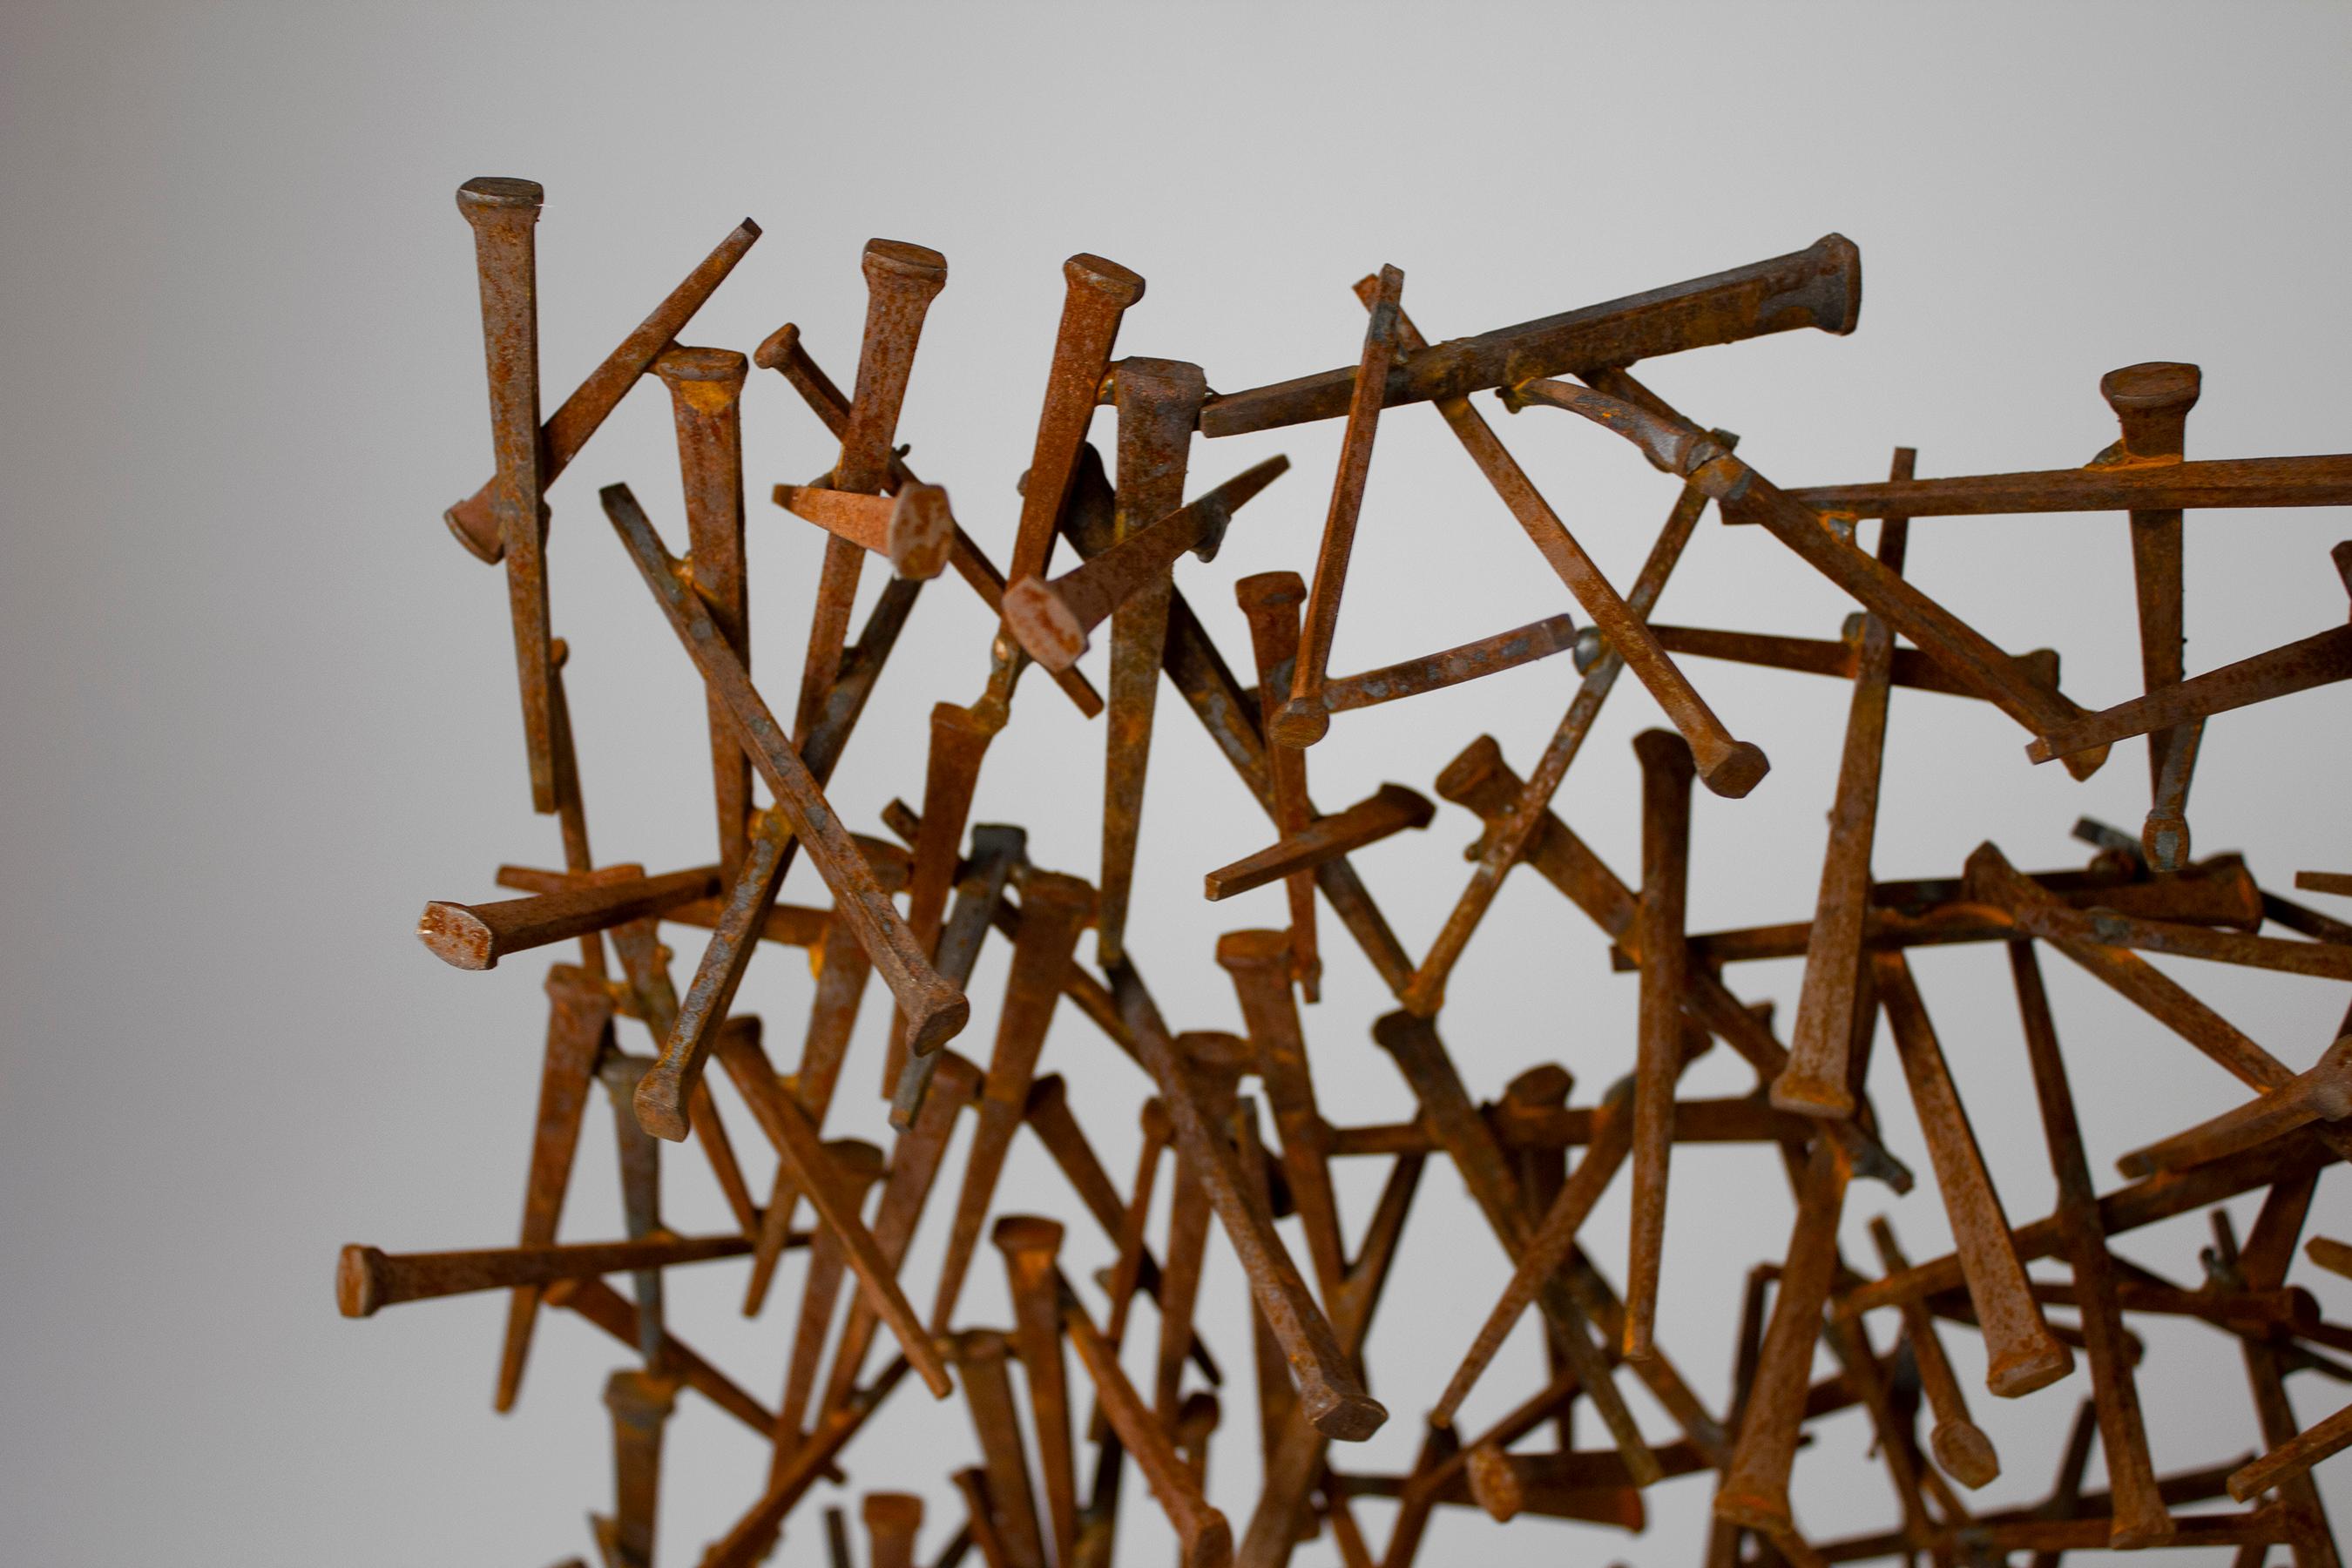 Brutalist Abstract Nail sculpture comprised of hundreds of hand welded flat nails with a rusticated patina. Would be great as a fireplace screen, in a window sil, or on a credenza.